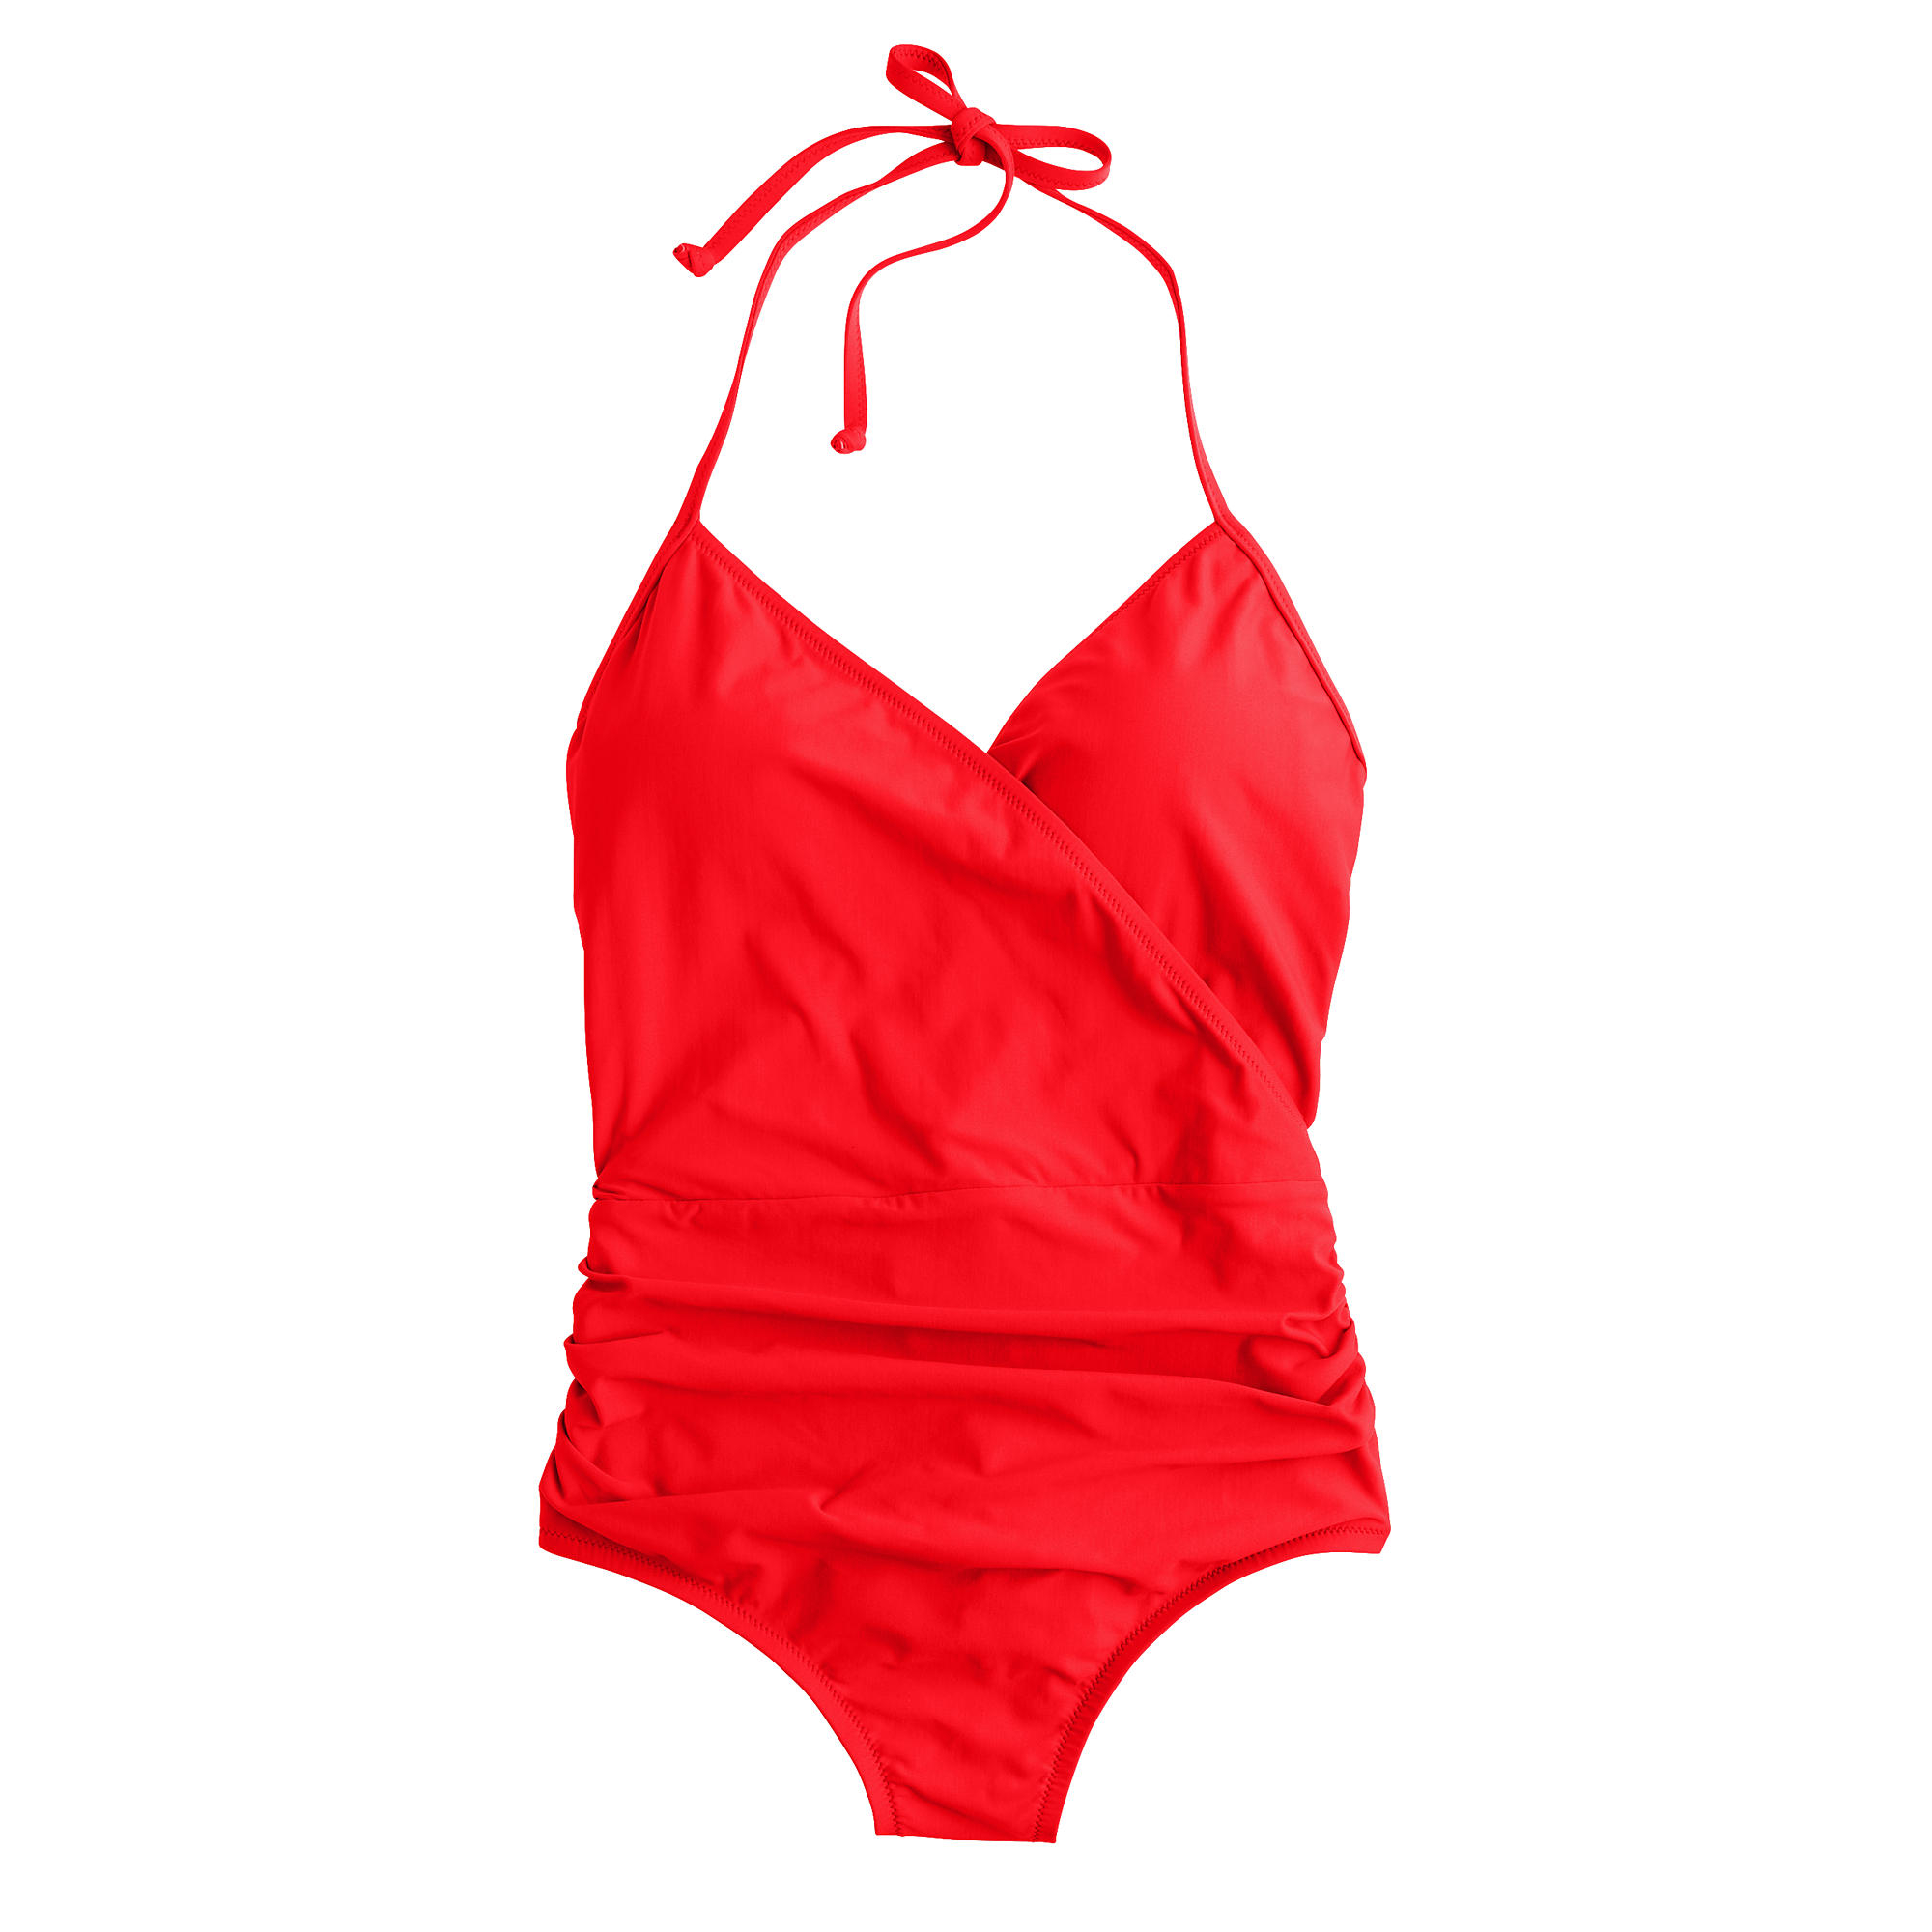 J.crew Halter Wrap One-piece Swimsuit in Red (belvedere red) | Lyst